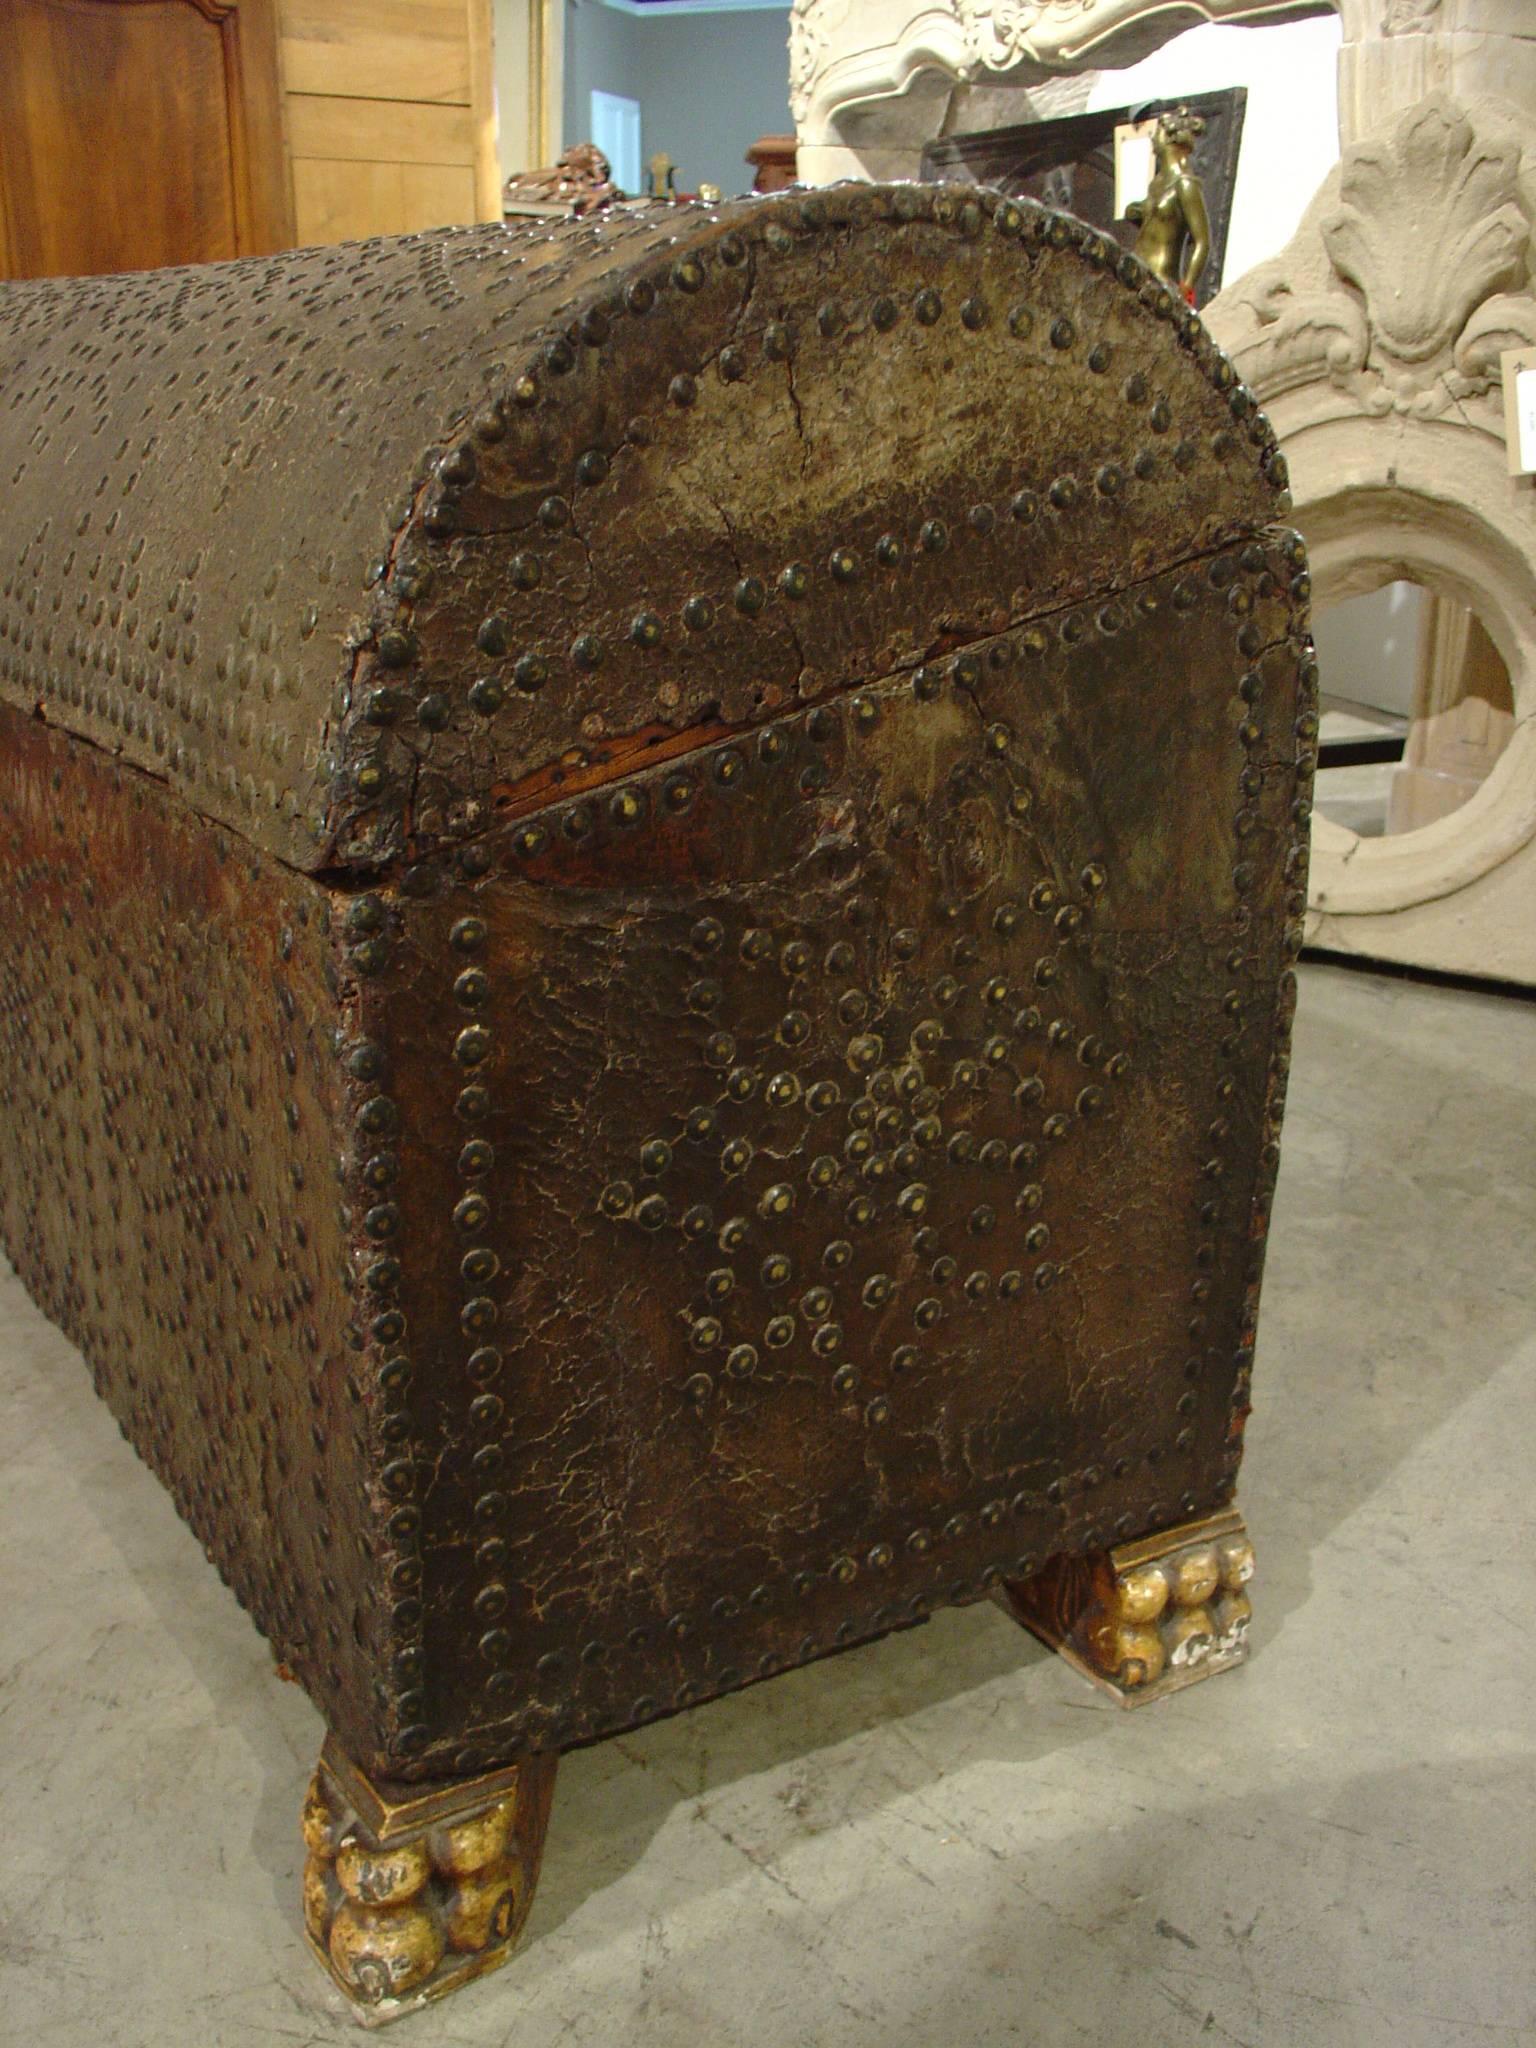 17th Century Rounded Top Leather Trunk from Spain 5